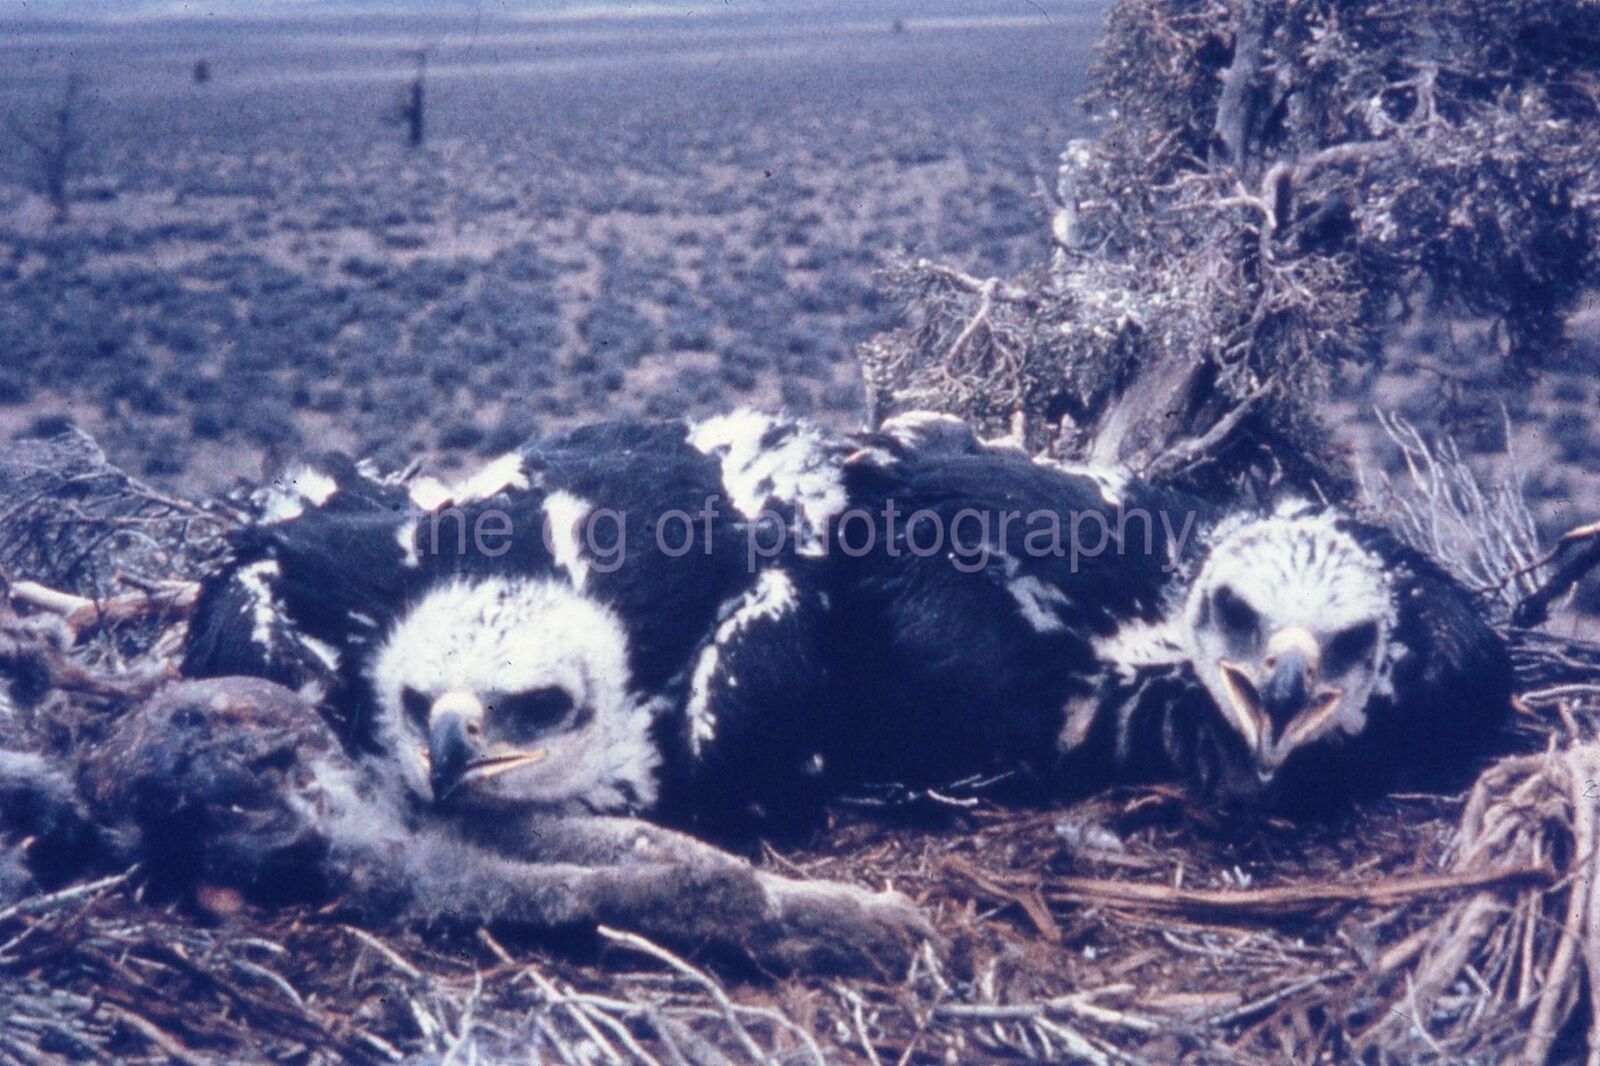 YOUNG EAGLES IN WEST 35mm FOUND BIRD SLIDE Vintage COLOR Photo Poster painting 15 T 11 M